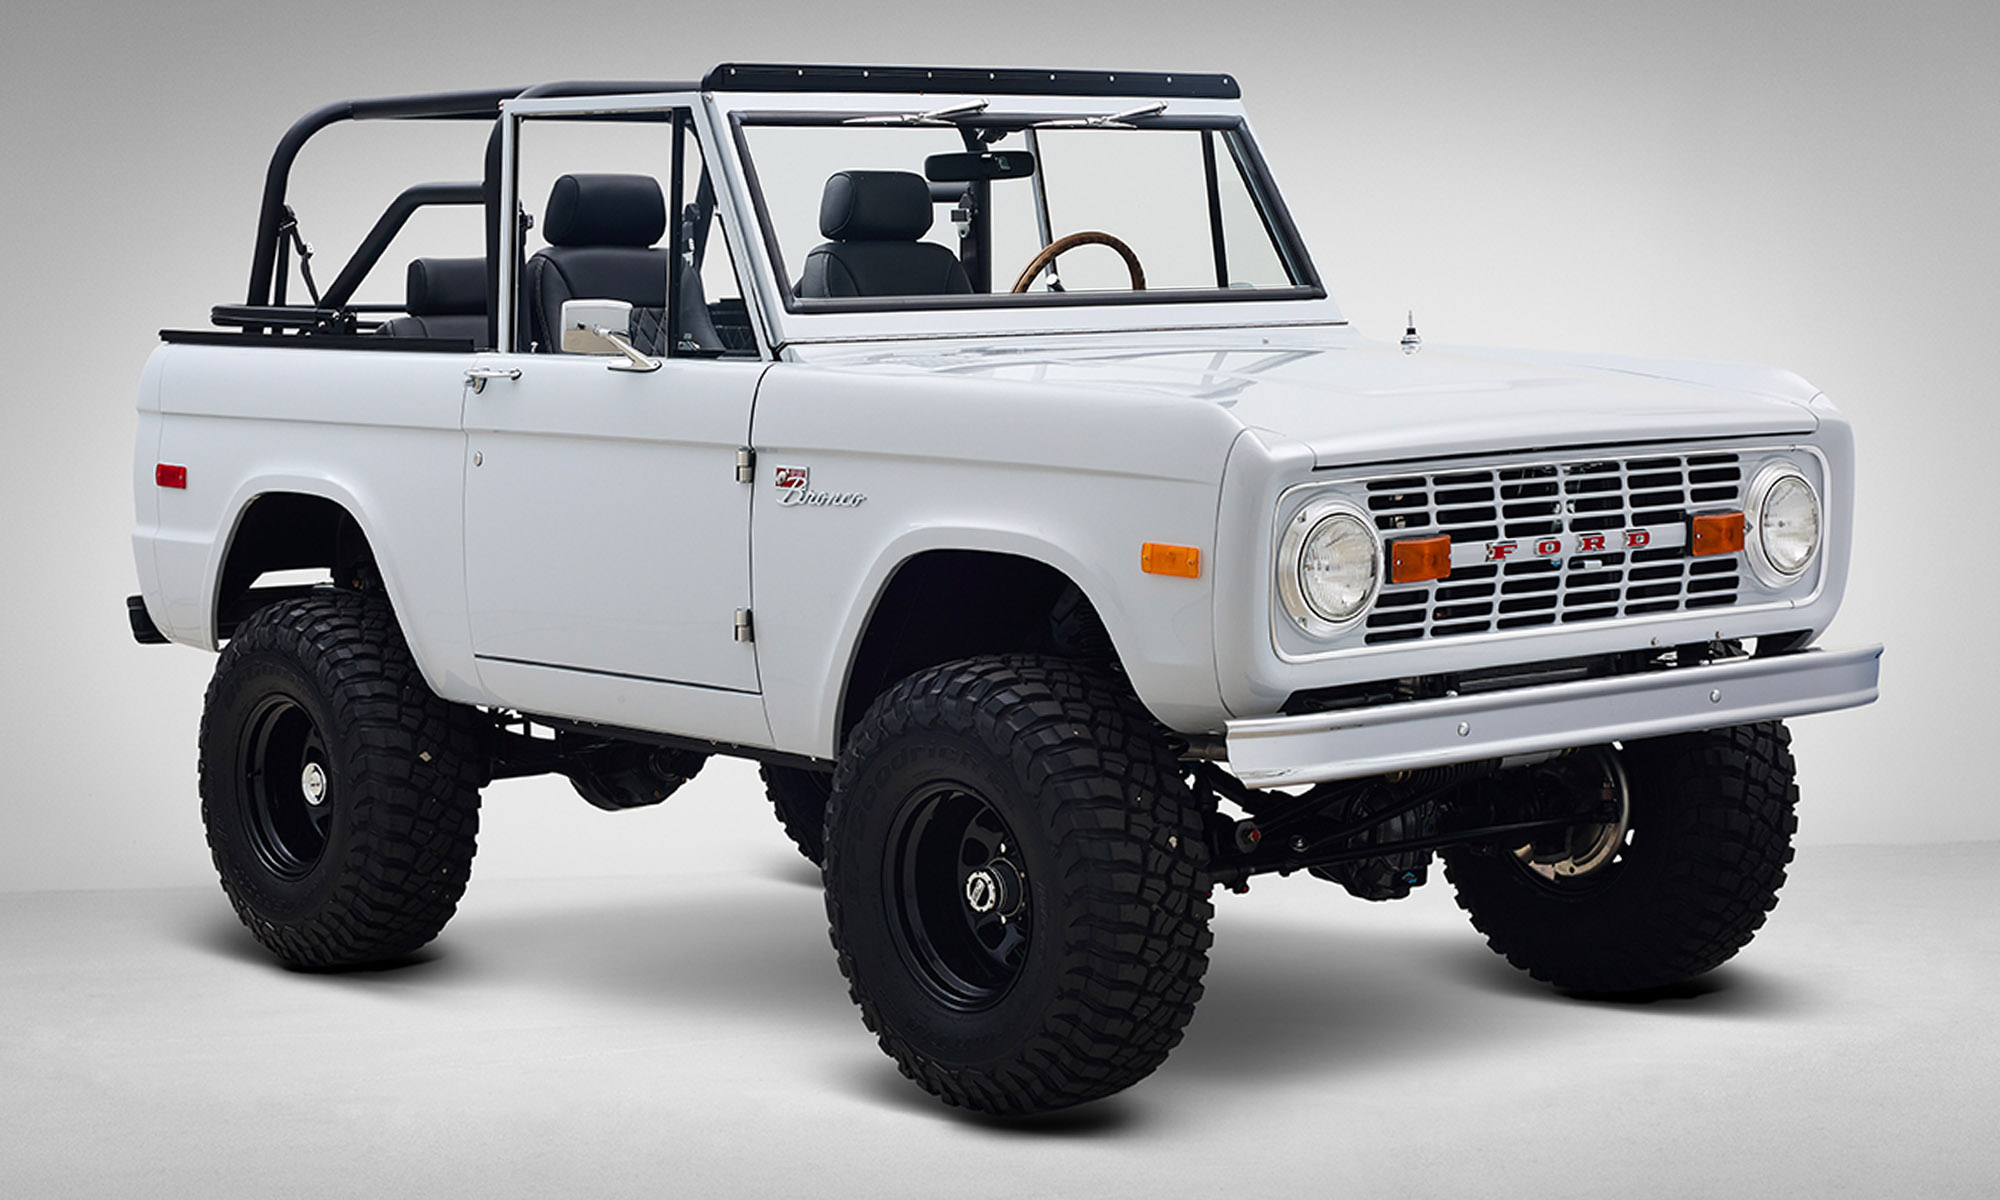 The Breakers Classic Ford Broncos 302 Series in Simply White over Black